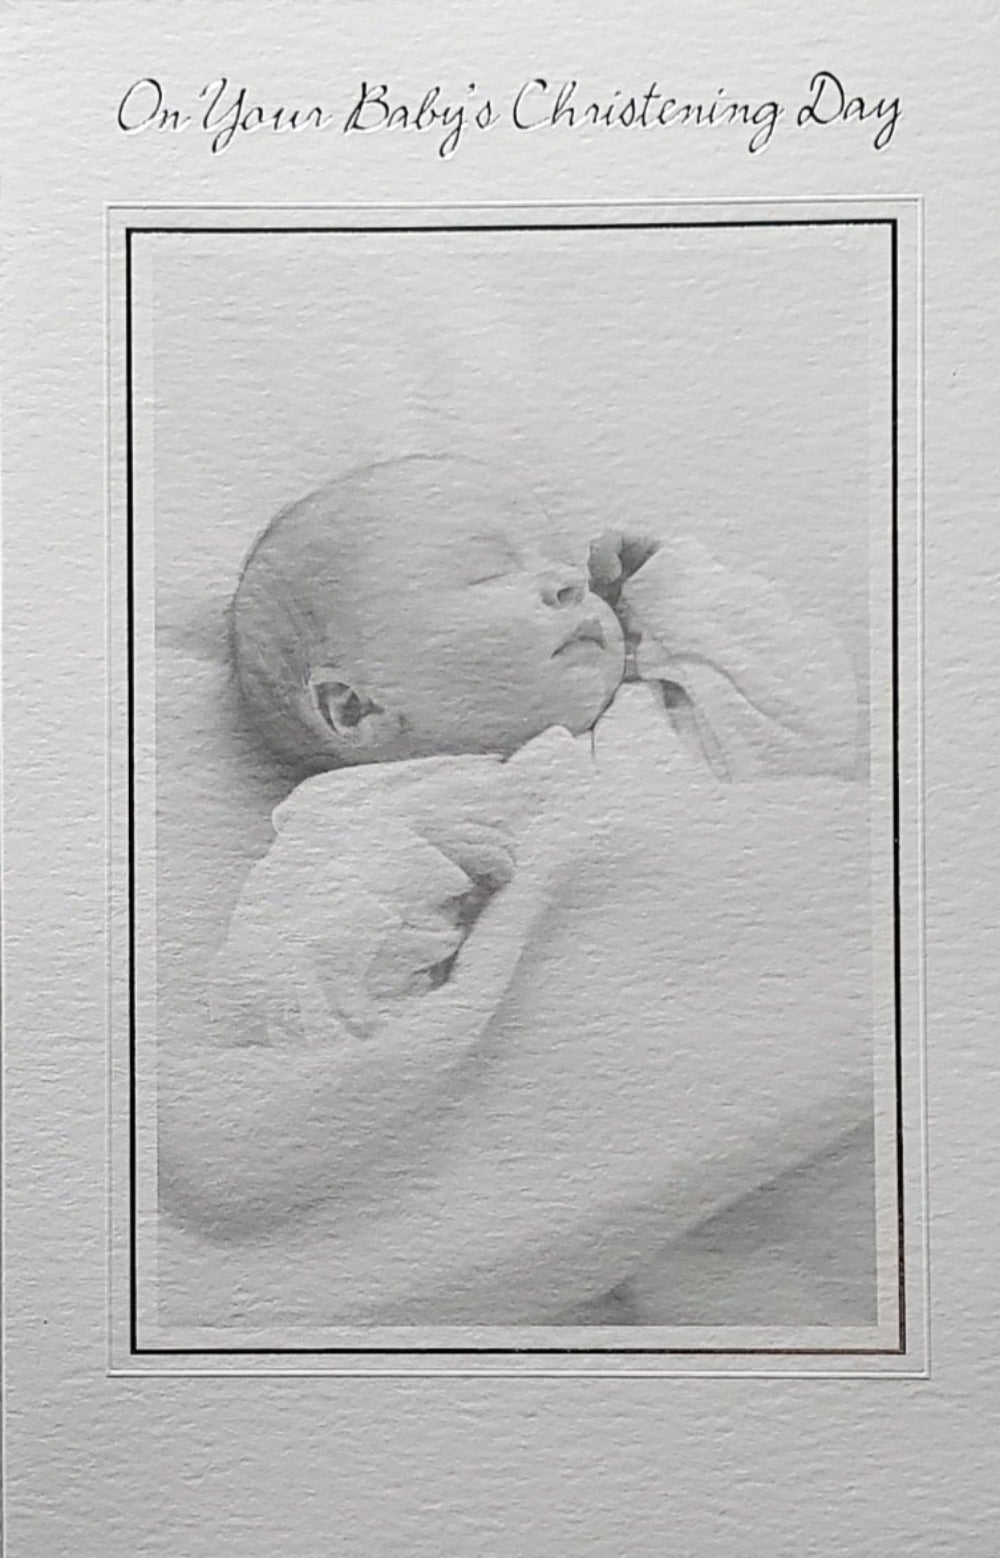 Christening Card - General / 'On Your Baby' & A Sleeping Baby In Grayscale